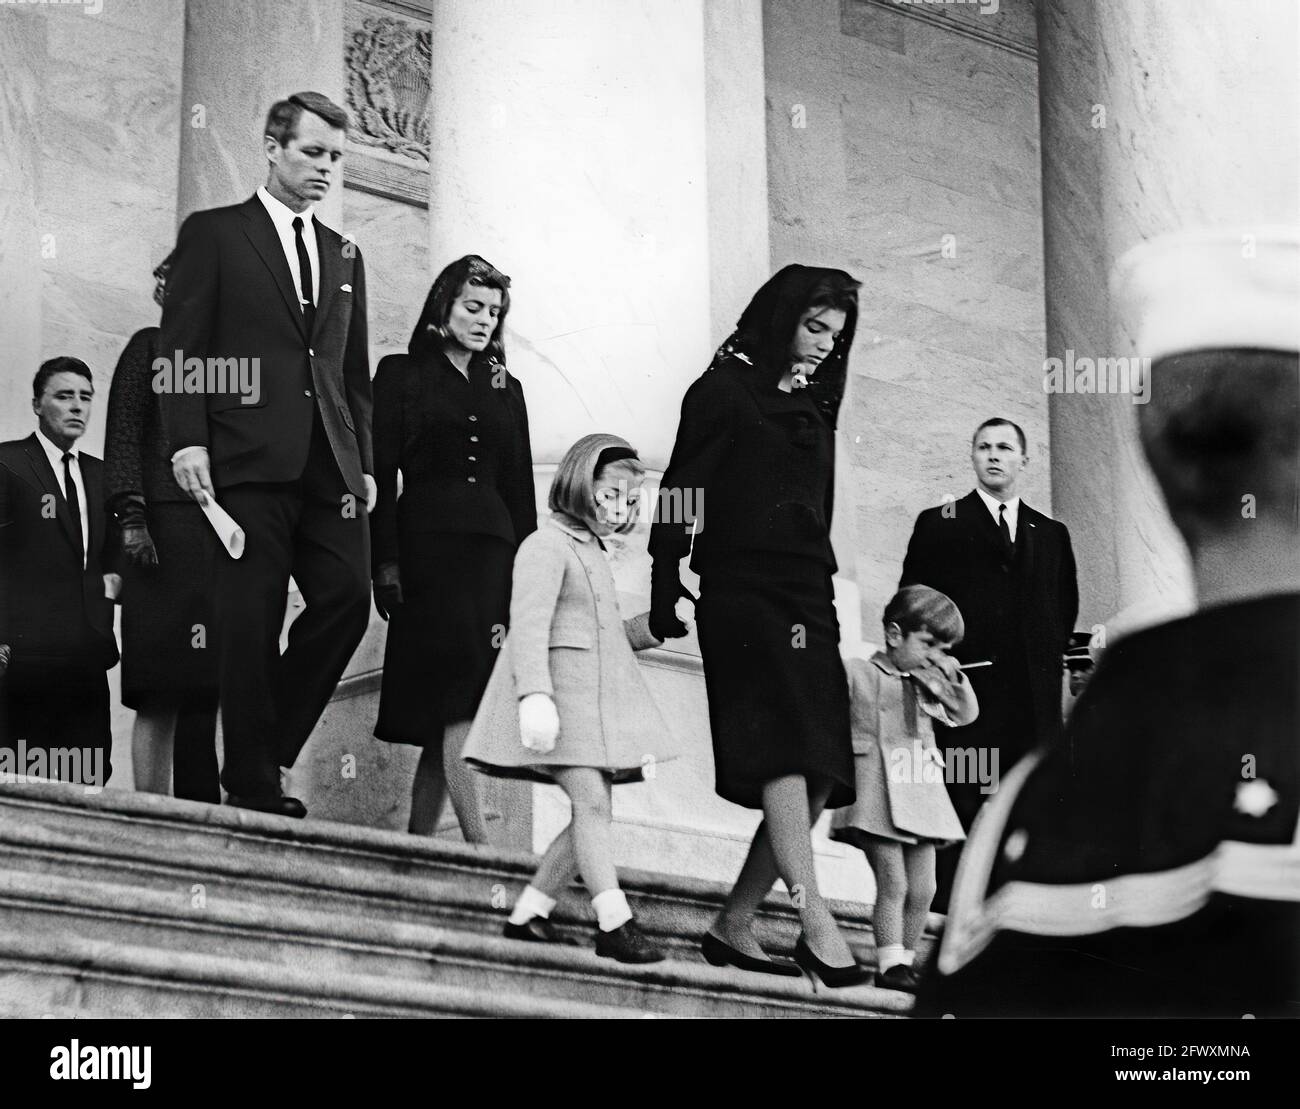 First Lady Jacqueline Kennedy and her children, Caroline Kennedy and John F. Kennedy, Jr., exit the U.S. Capitol Building where the late President John F. Kennedy lies in state. Walking behind: Peter Lawford; Attorney General, Robert F. Kennedy; Patricia Kennedy Lawford. Washington, D.C.. Stock Photo